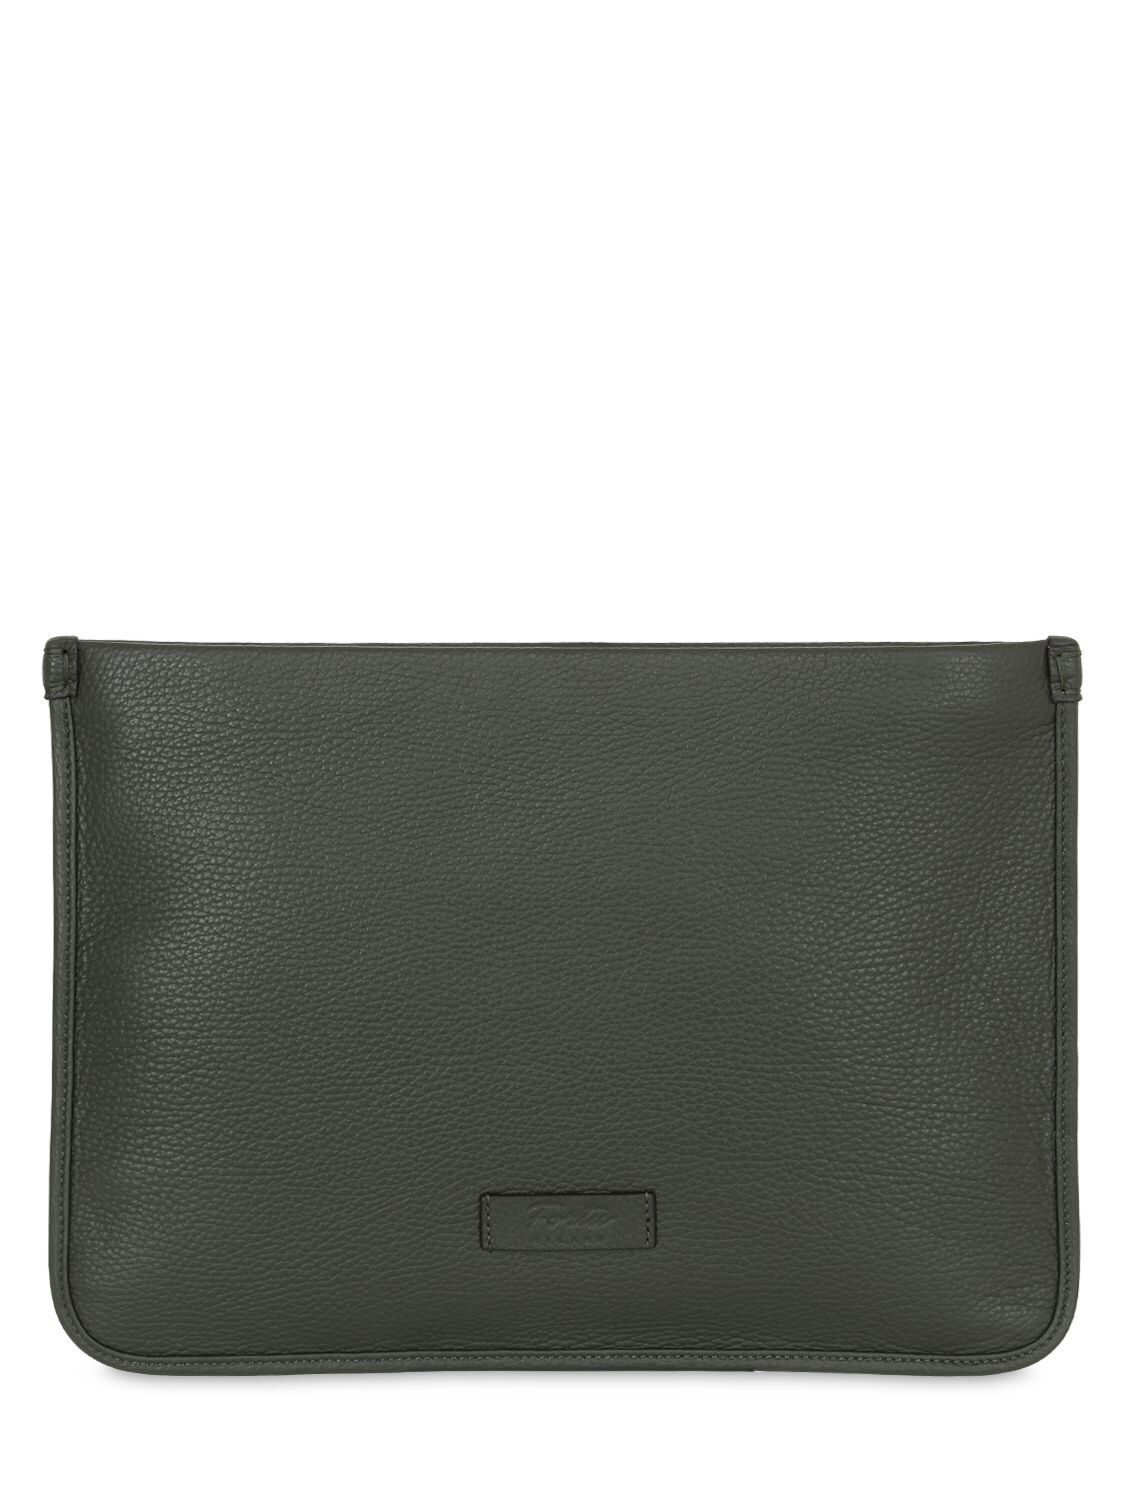 Fortu Milano Jean Leather Pouch In Alvar Green